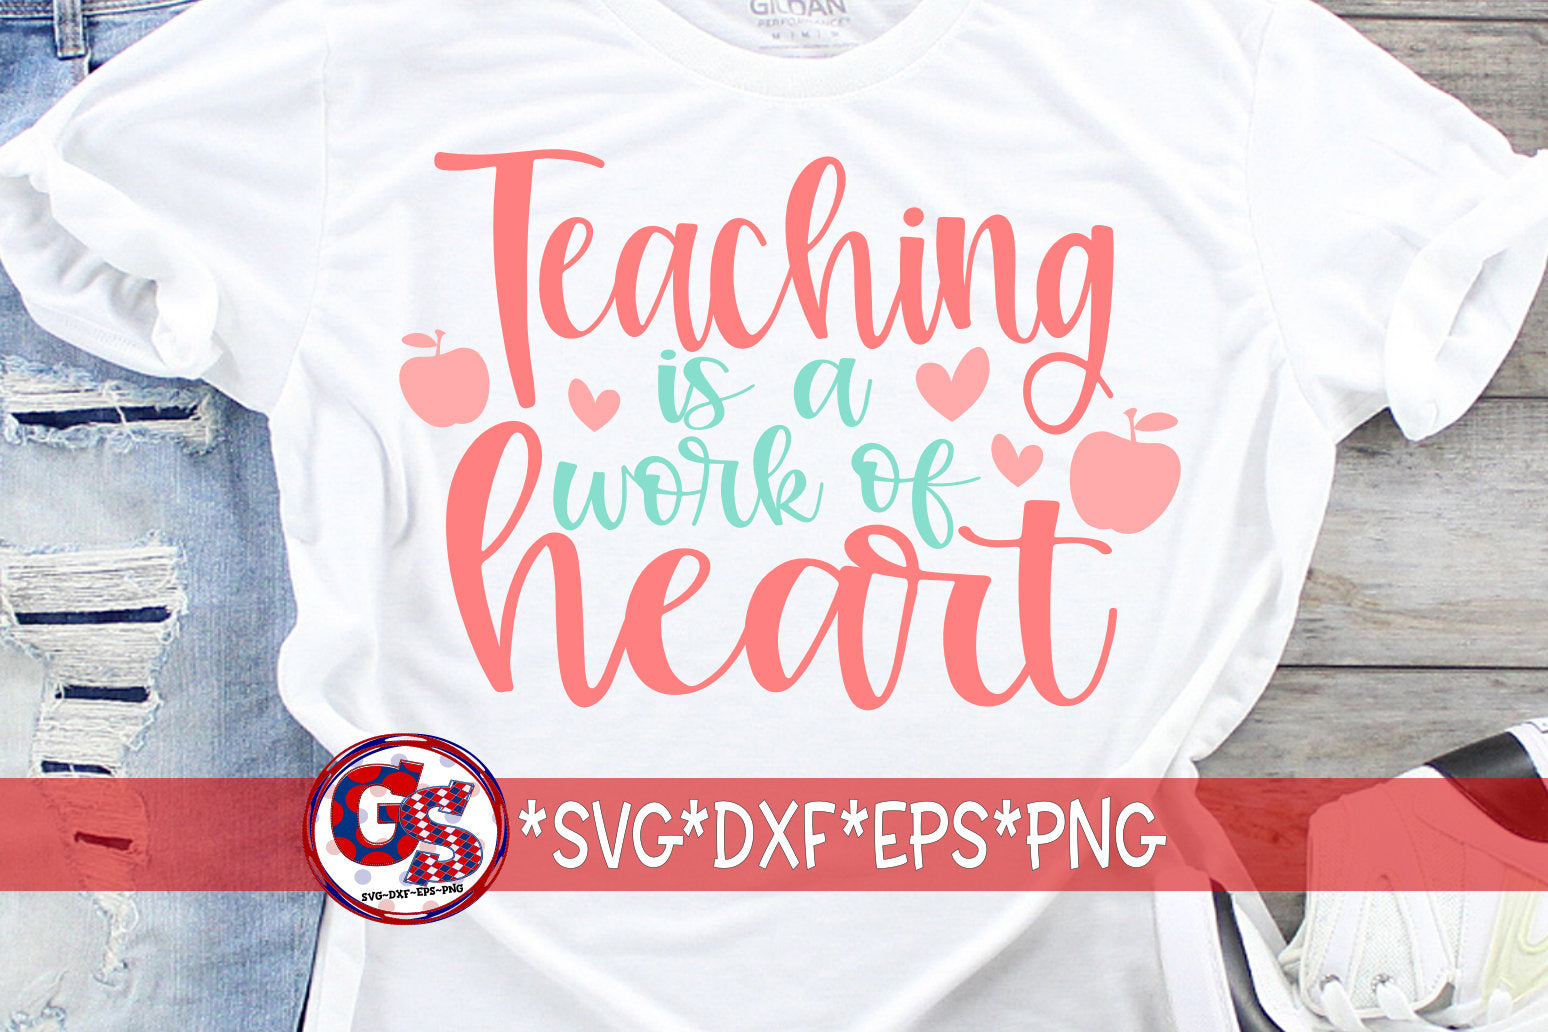 Teaching Is A Work Of Heart SvG | Valentine&#39;s Day SvG | Heart SvG | Teacher SvG | Valentine&#39;s Day SvG | Teach Svg  Instant Download Cut File